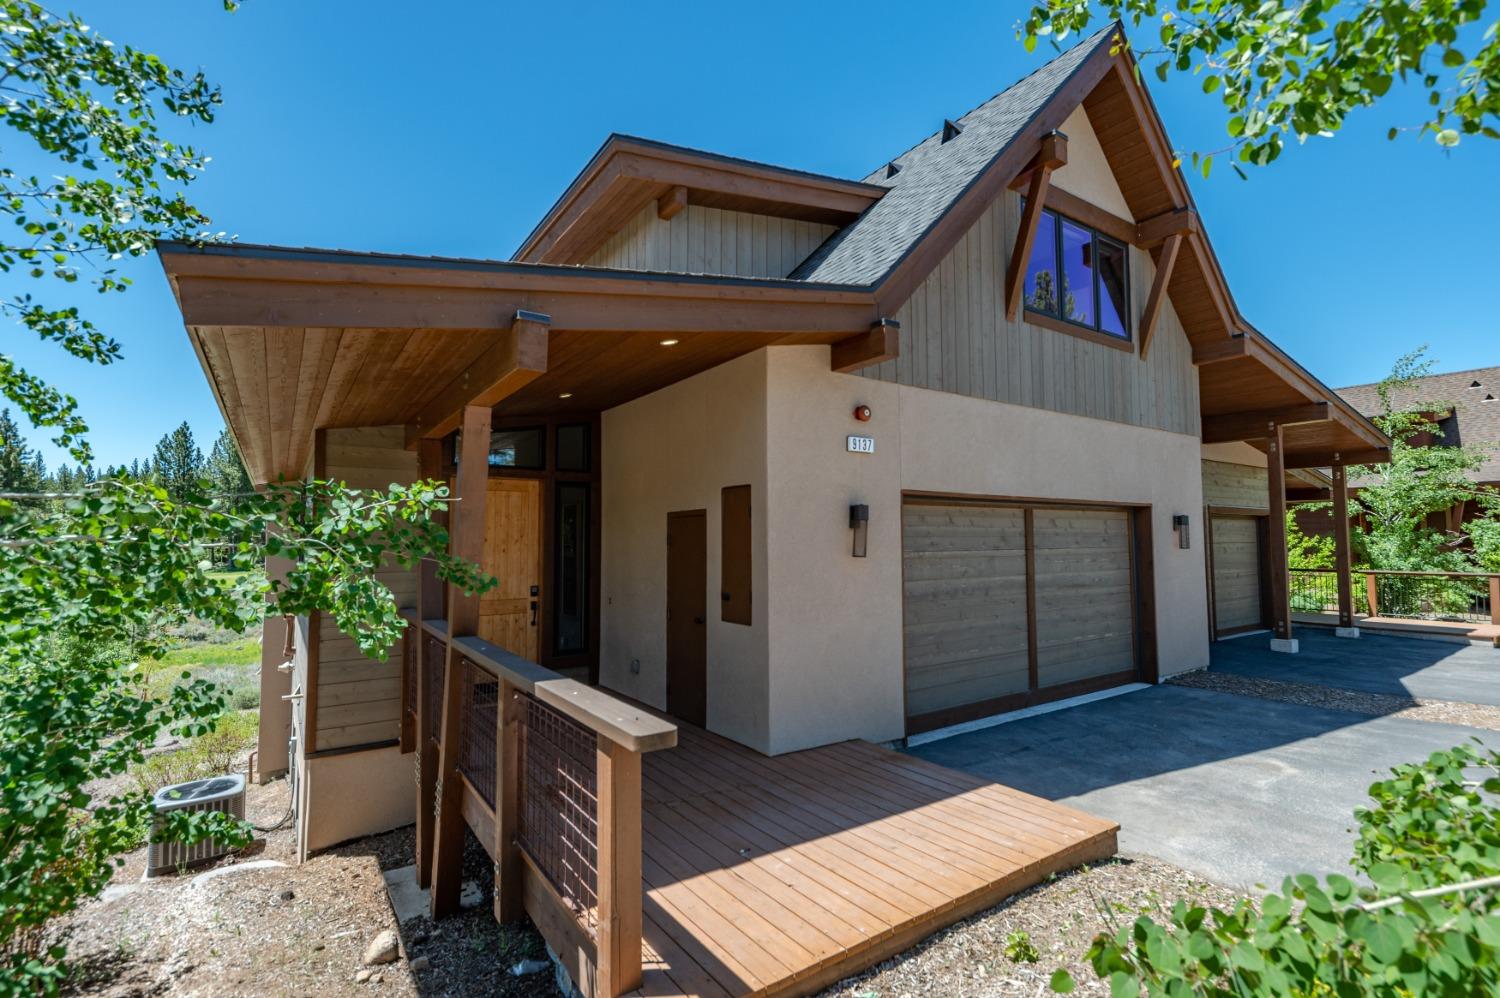 Photo of 9137 Heartwood Dr in Truckee, CA